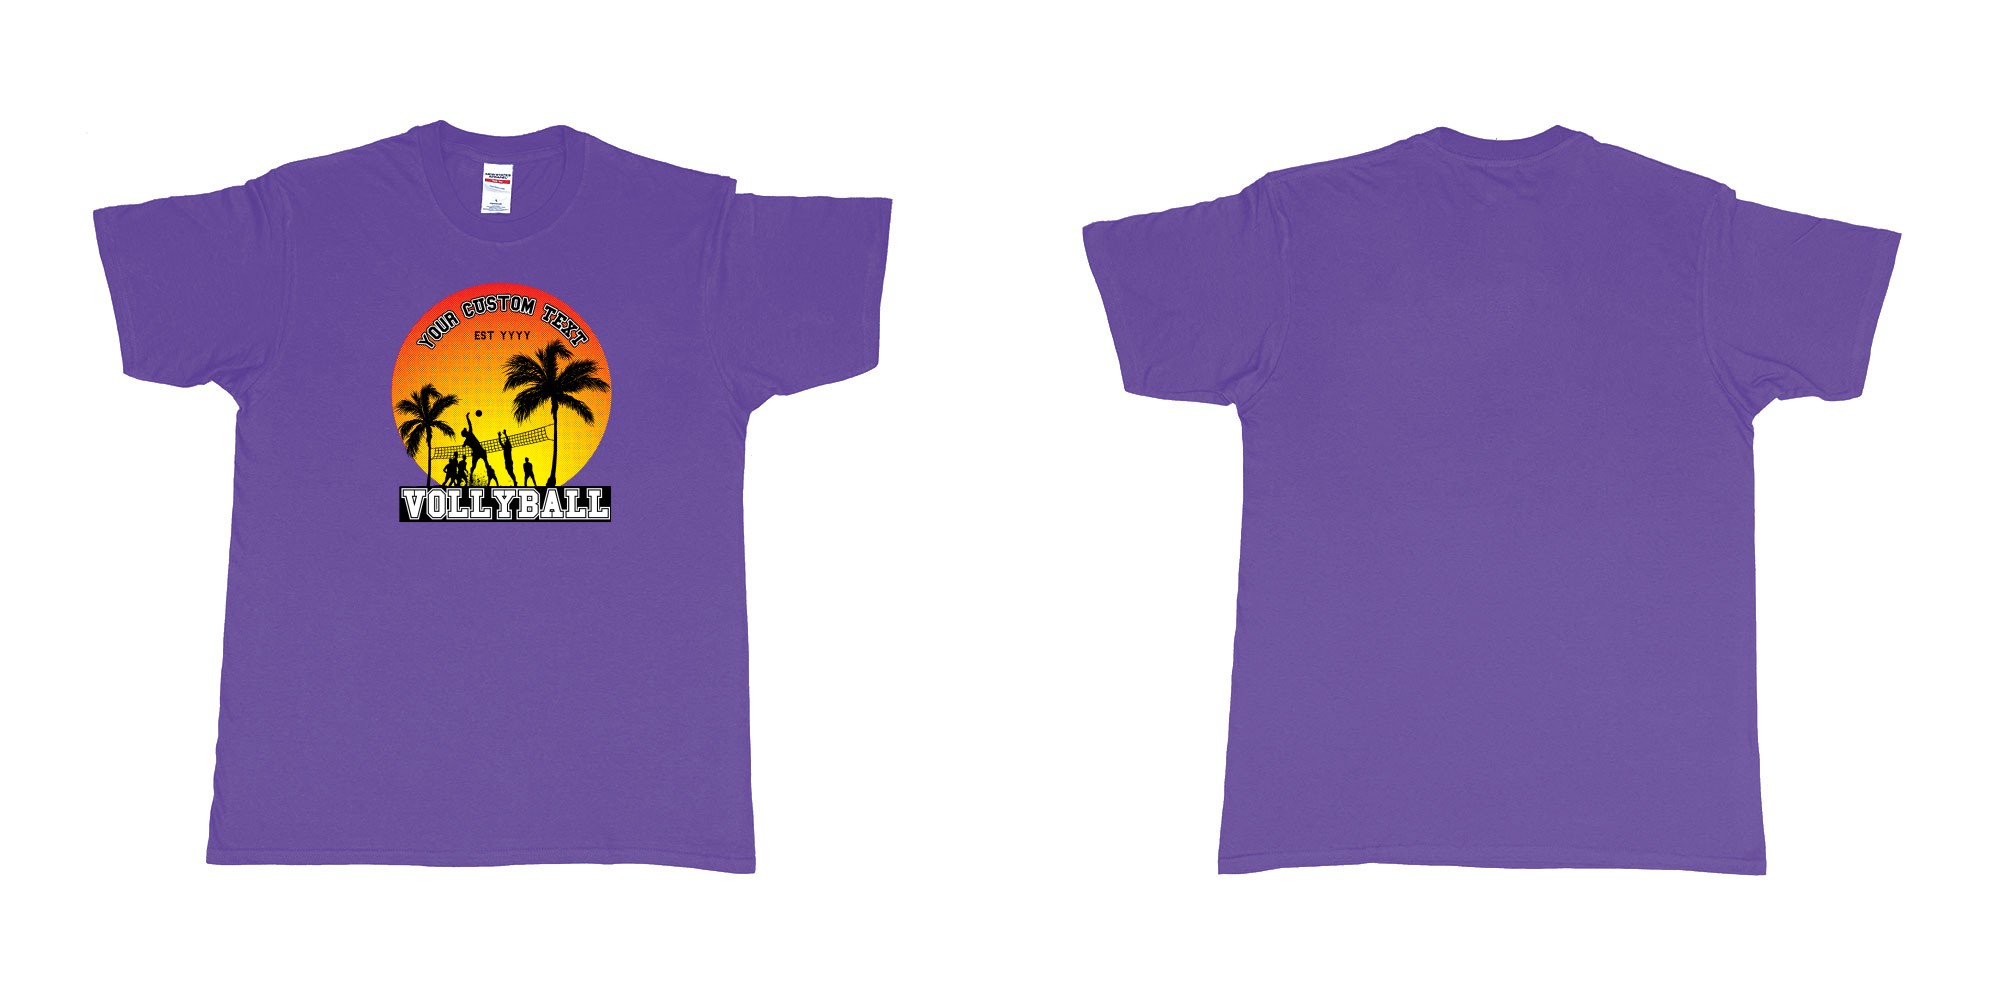 Custom tshirt design sunset volleyball t shirt with a sunset view and your custom print text and year in fabric color purple choice your own text made in Bali by The Pirate Way